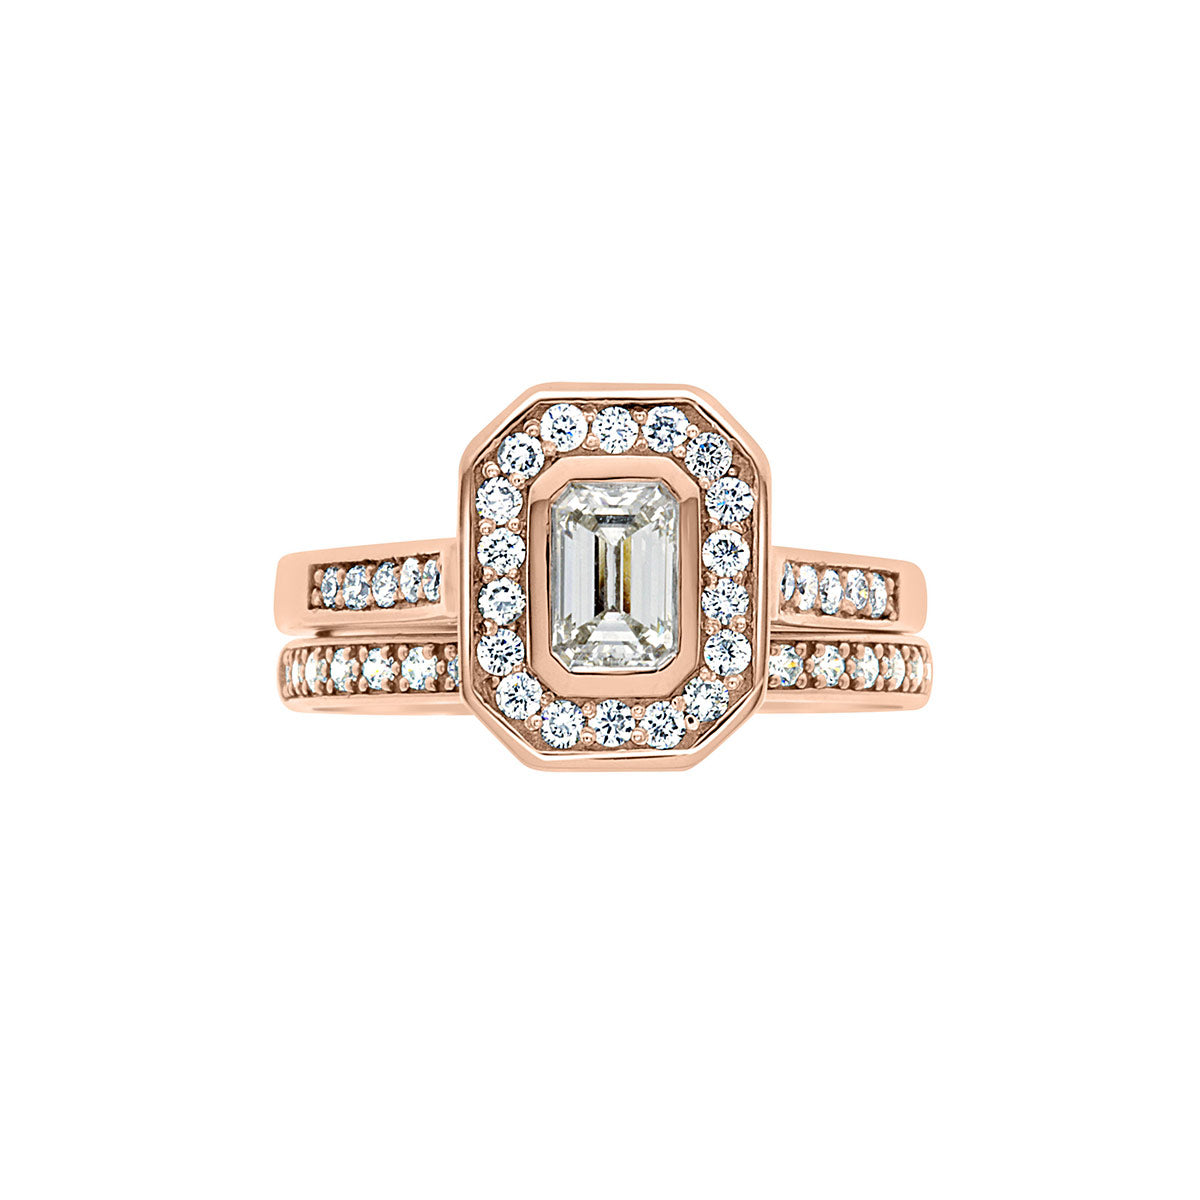 Emerald Cut Halo Ring in rose gold with a matching diamond studded wedding ring